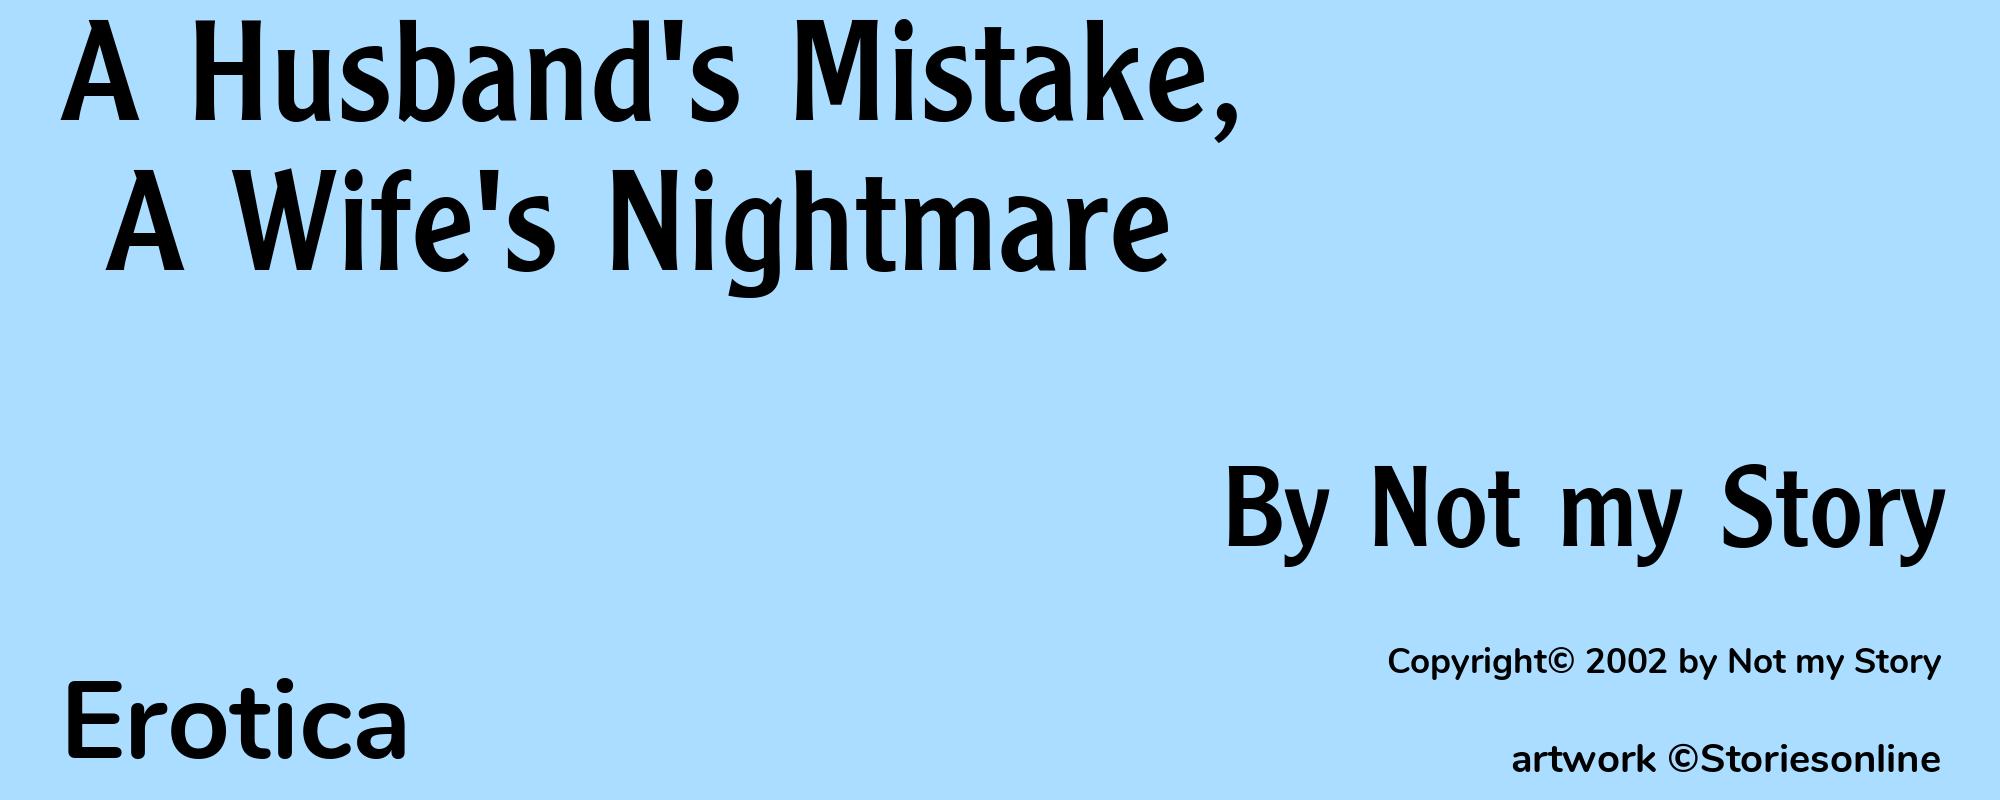 A Husband's Mistake, A Wife's Nightmare - Cover